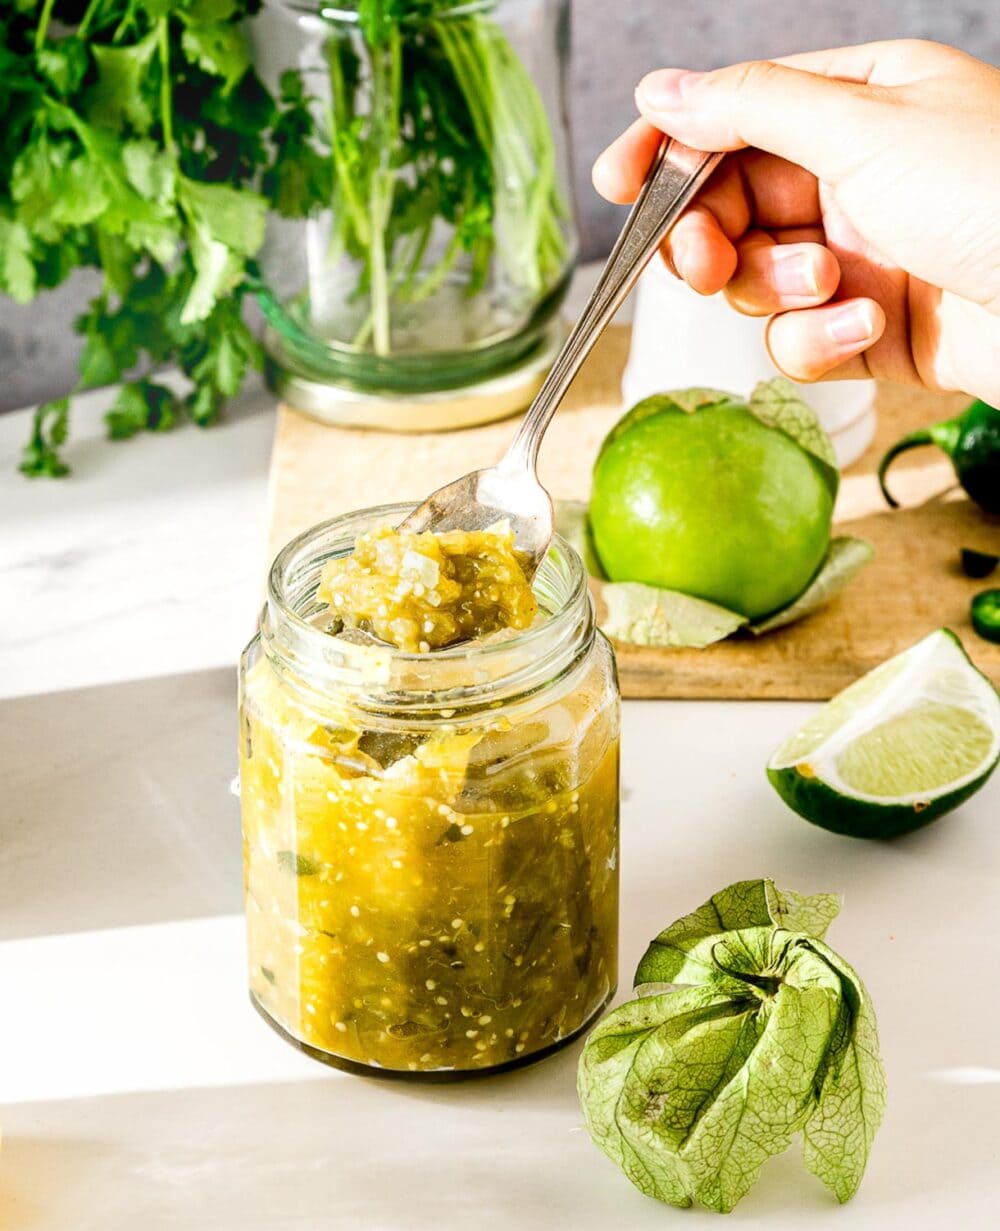 spooning tomatillo salsa verde out of a glass jar.